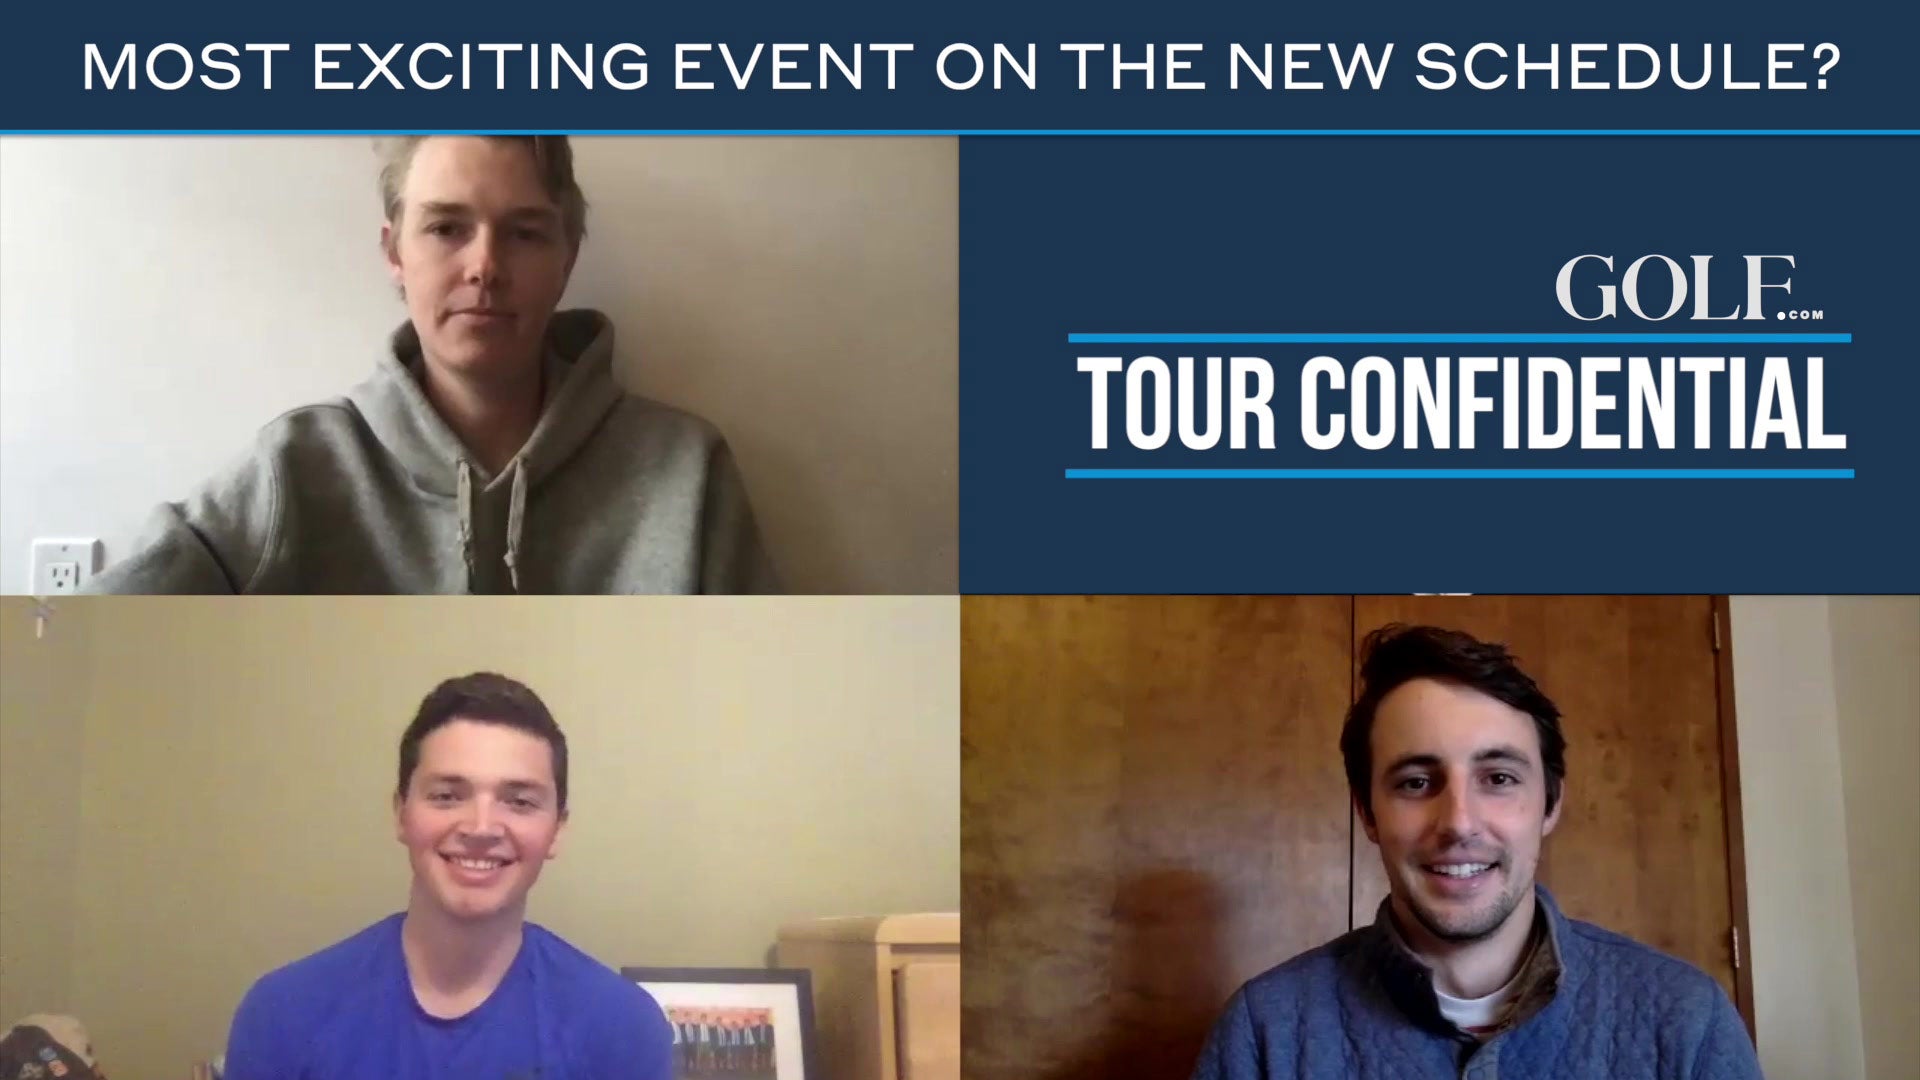 Tour Confidential What is the most exciting event on the new schedule?